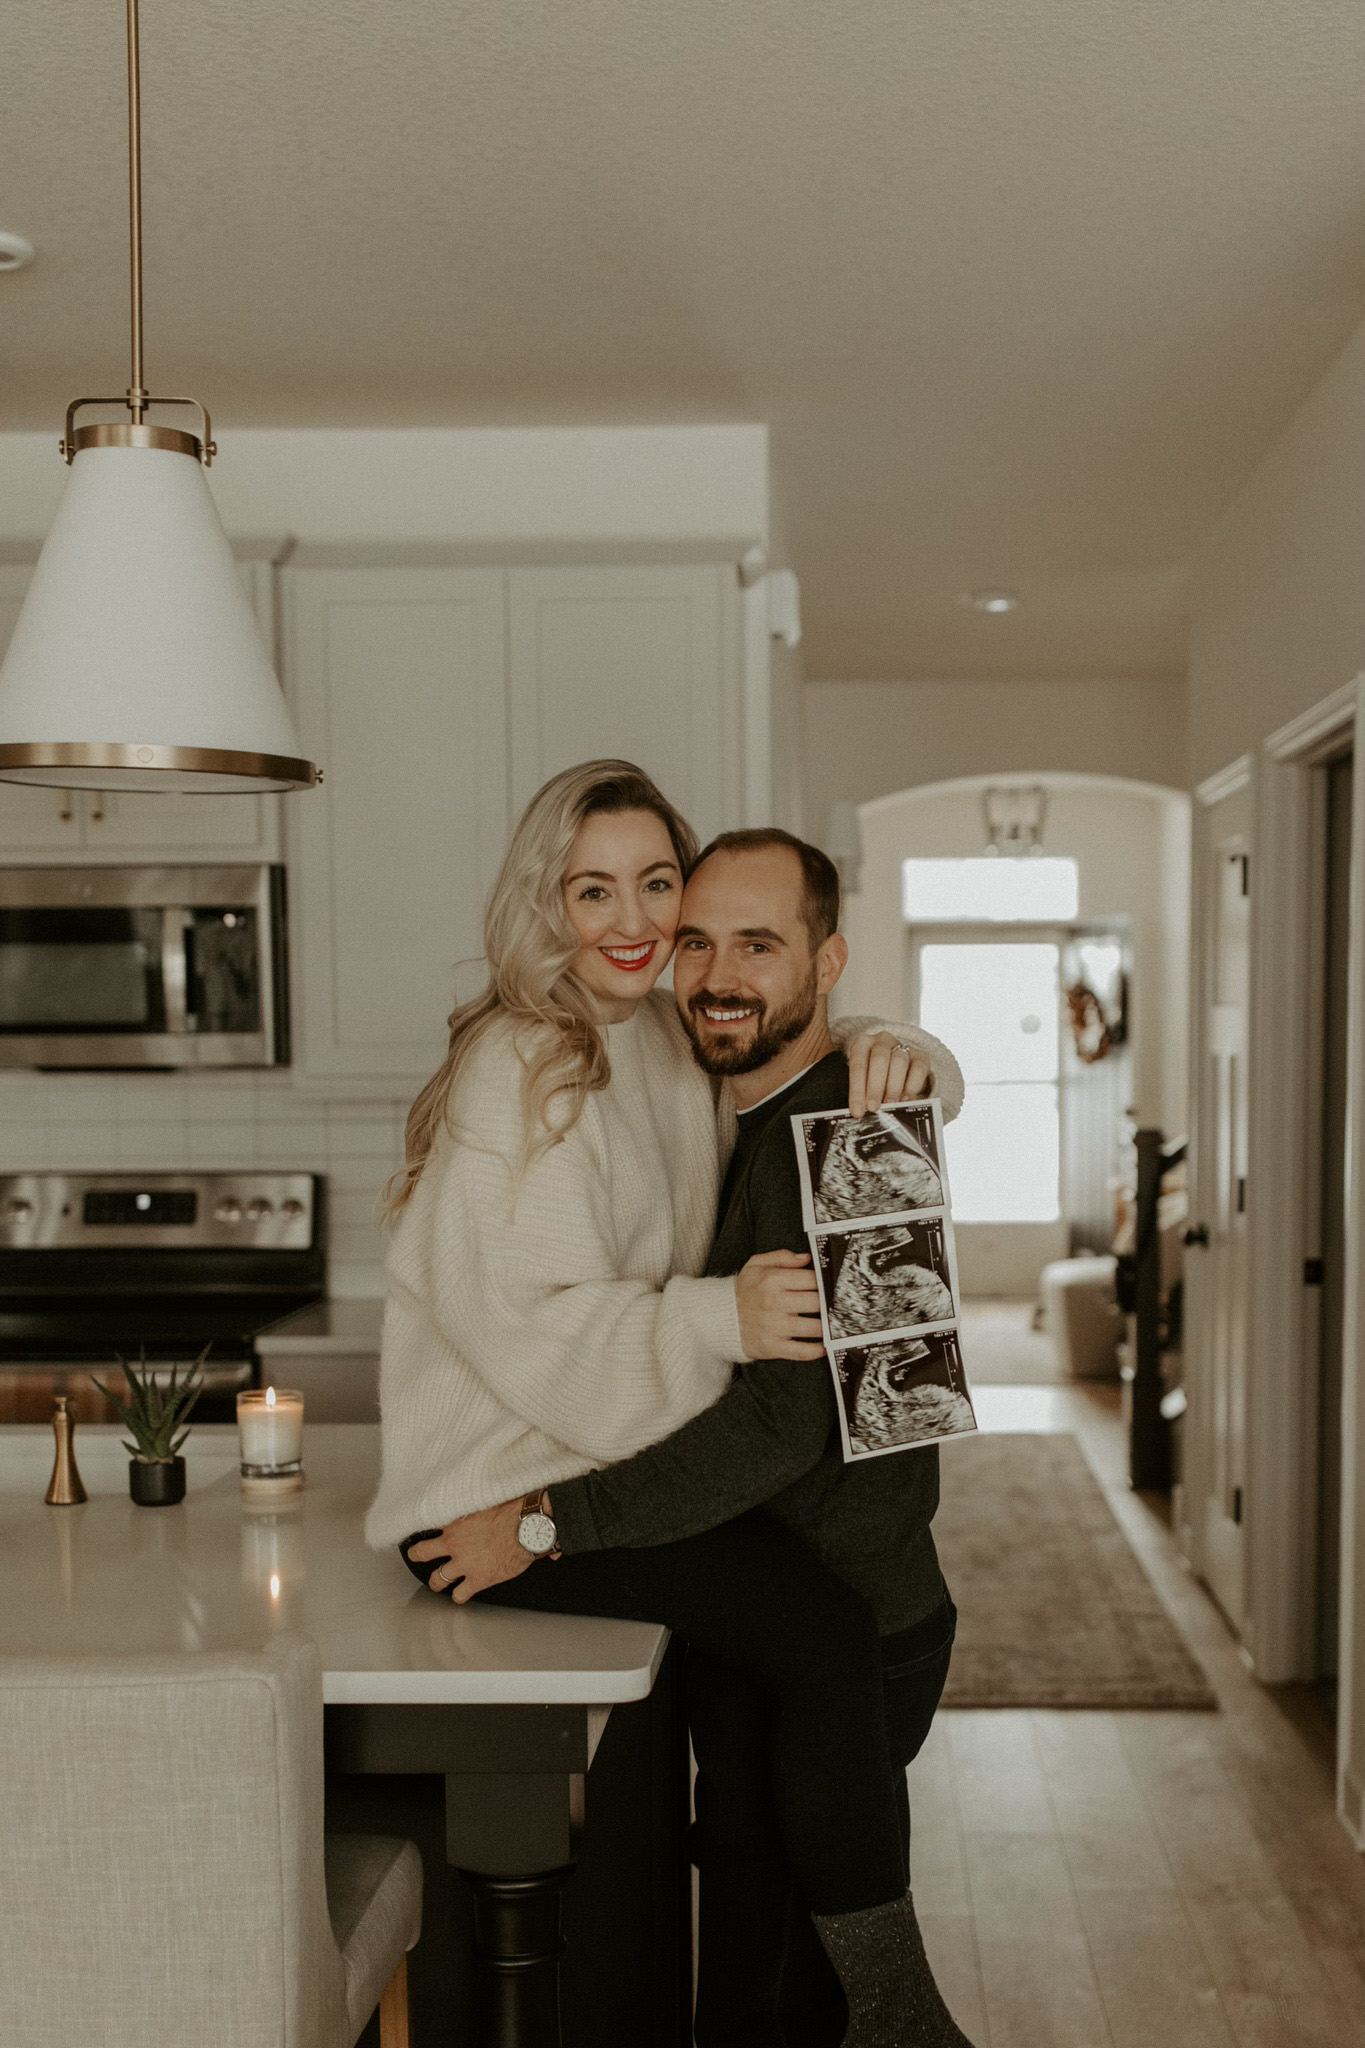 Kelly Zugay - Minnesota Lifestyle, Decor, and Travel Blog - Pregnancy Maternity Photo Inspiration Baby Announcement Ideas - Photo